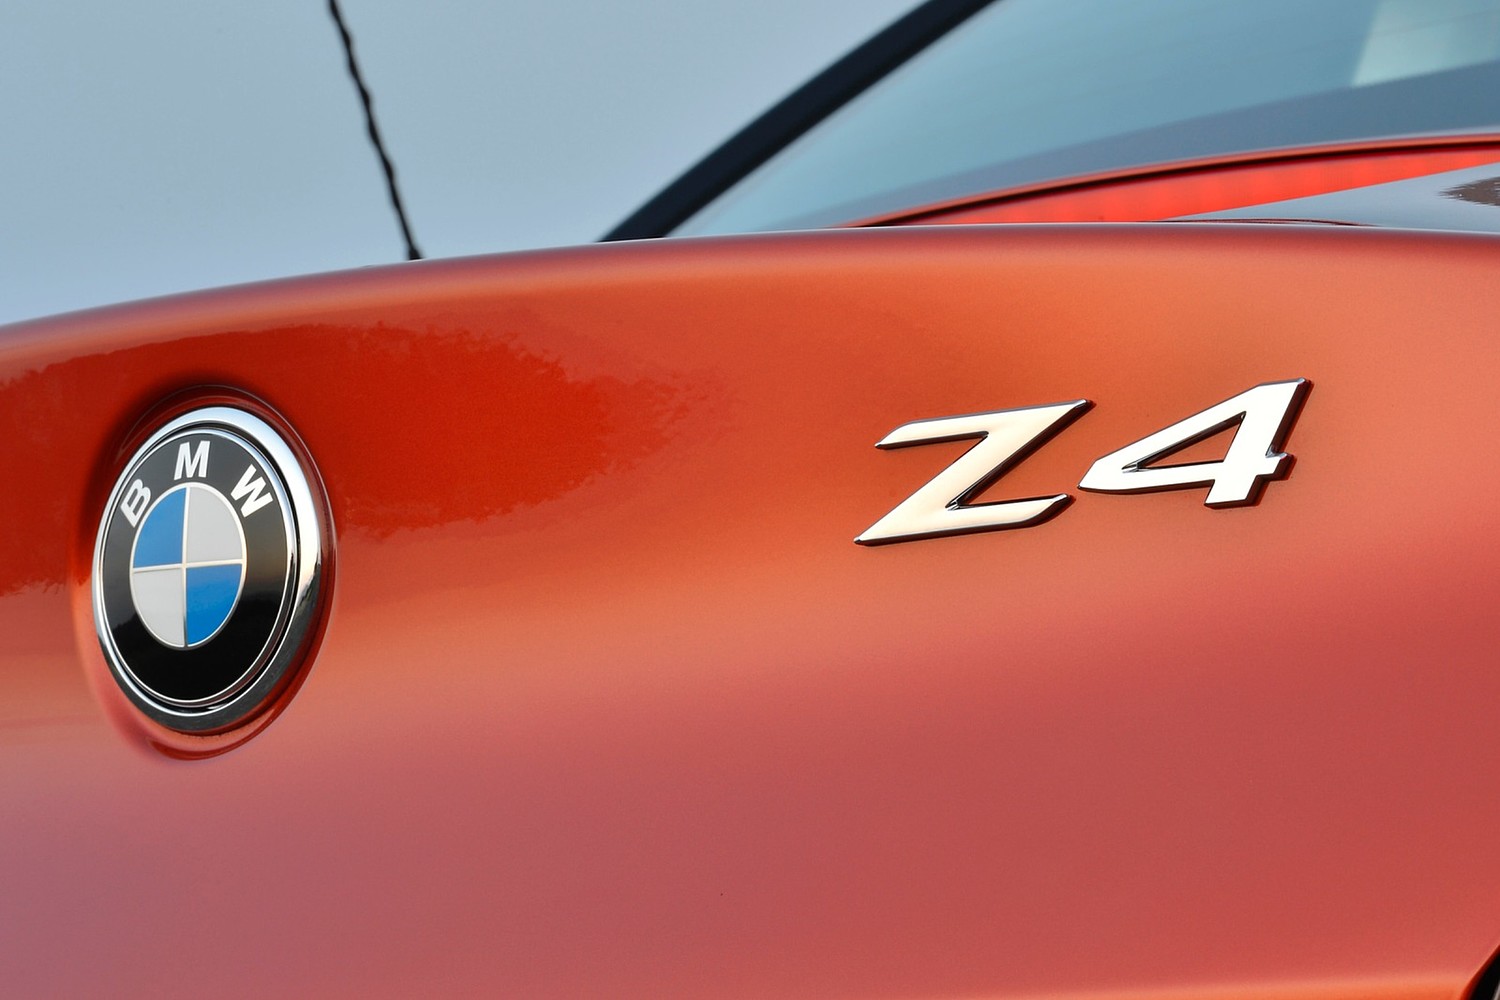 BMW Z4 sDrive35is Convertible Rear Badge (2014 model year shown)